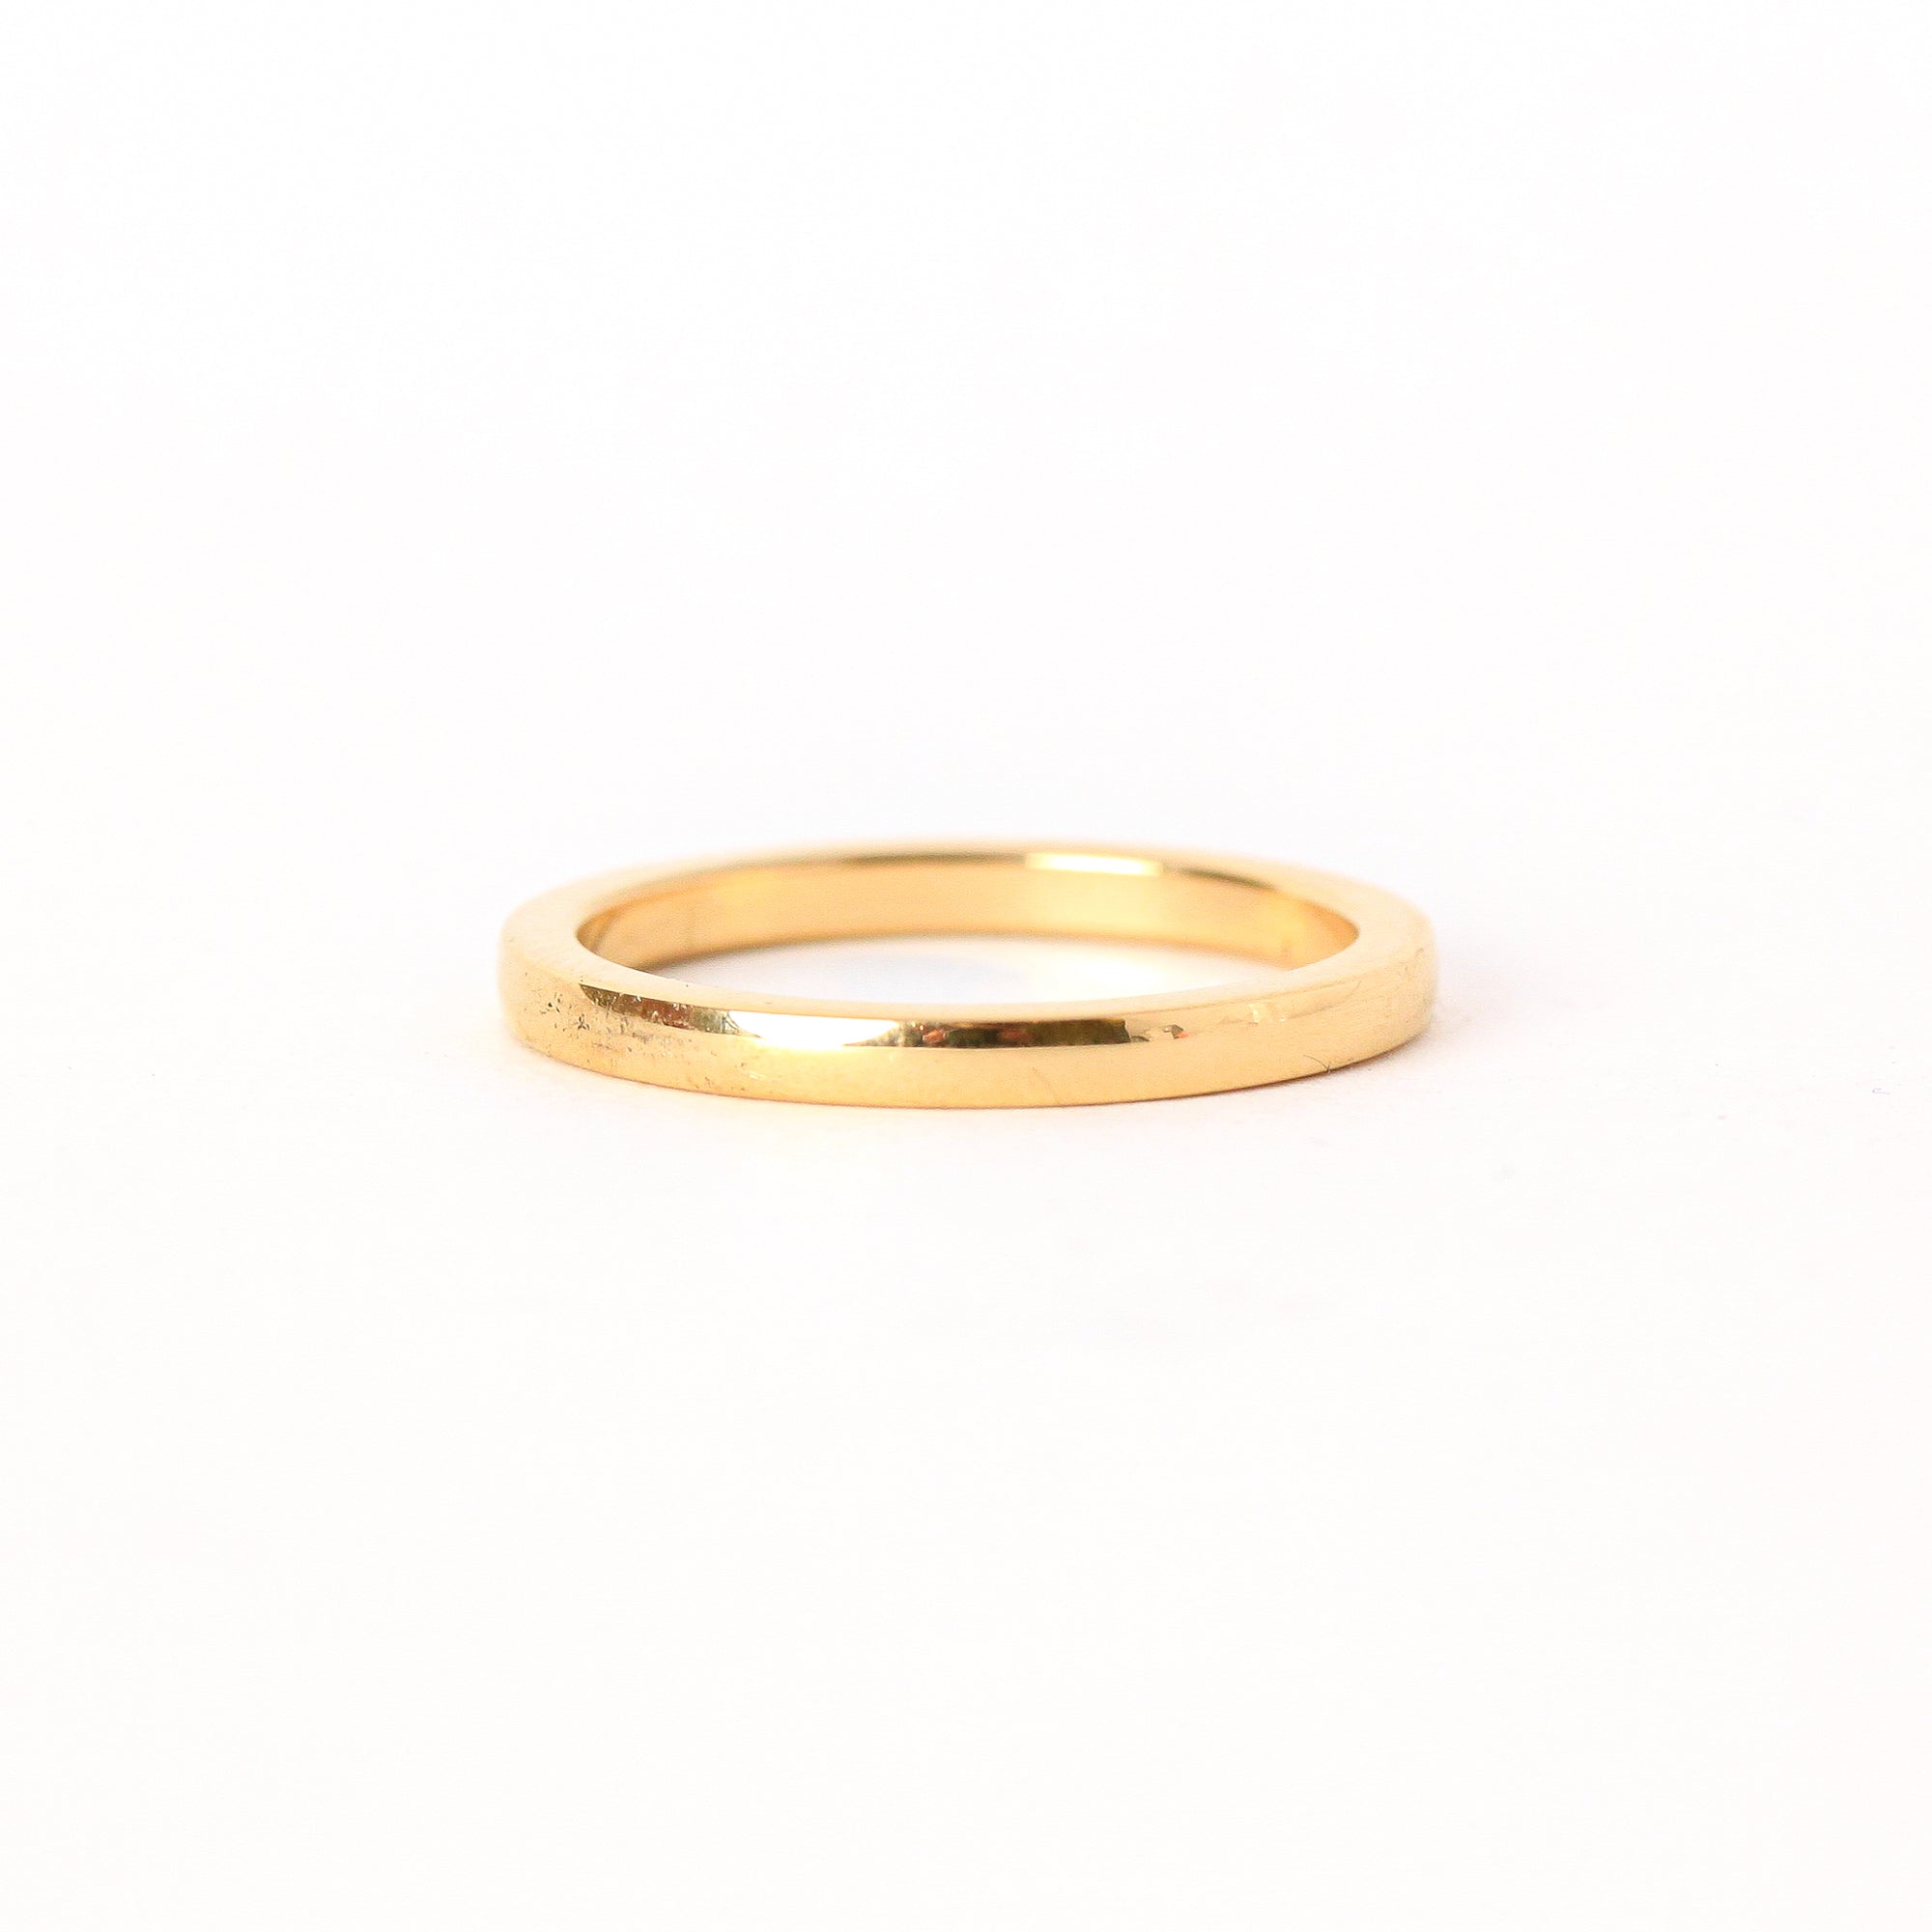 Slim wedding band, using recycled refined gold - handmade in Melbourne.